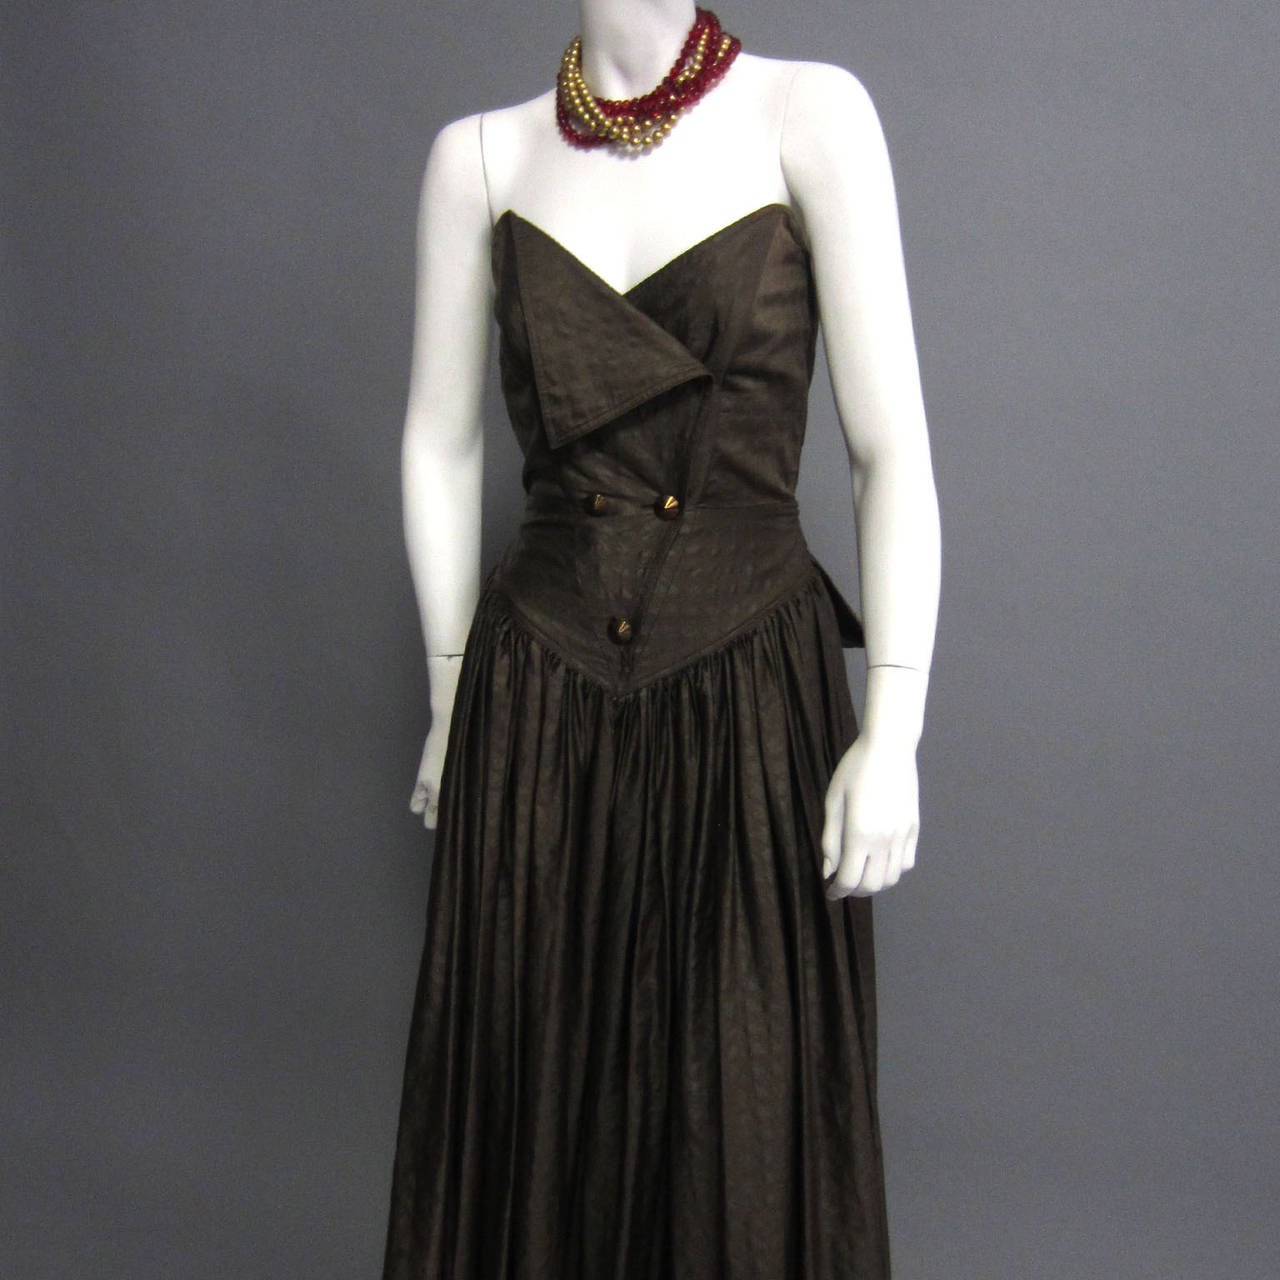 There are several, stunning details to this BALMAIN cocktail dress. The lightweight fabric is covered in a brown on brown houndstooth print; a shiny brown and a dull brown intersect to create the faint print. The bodice is made of two, overlapping